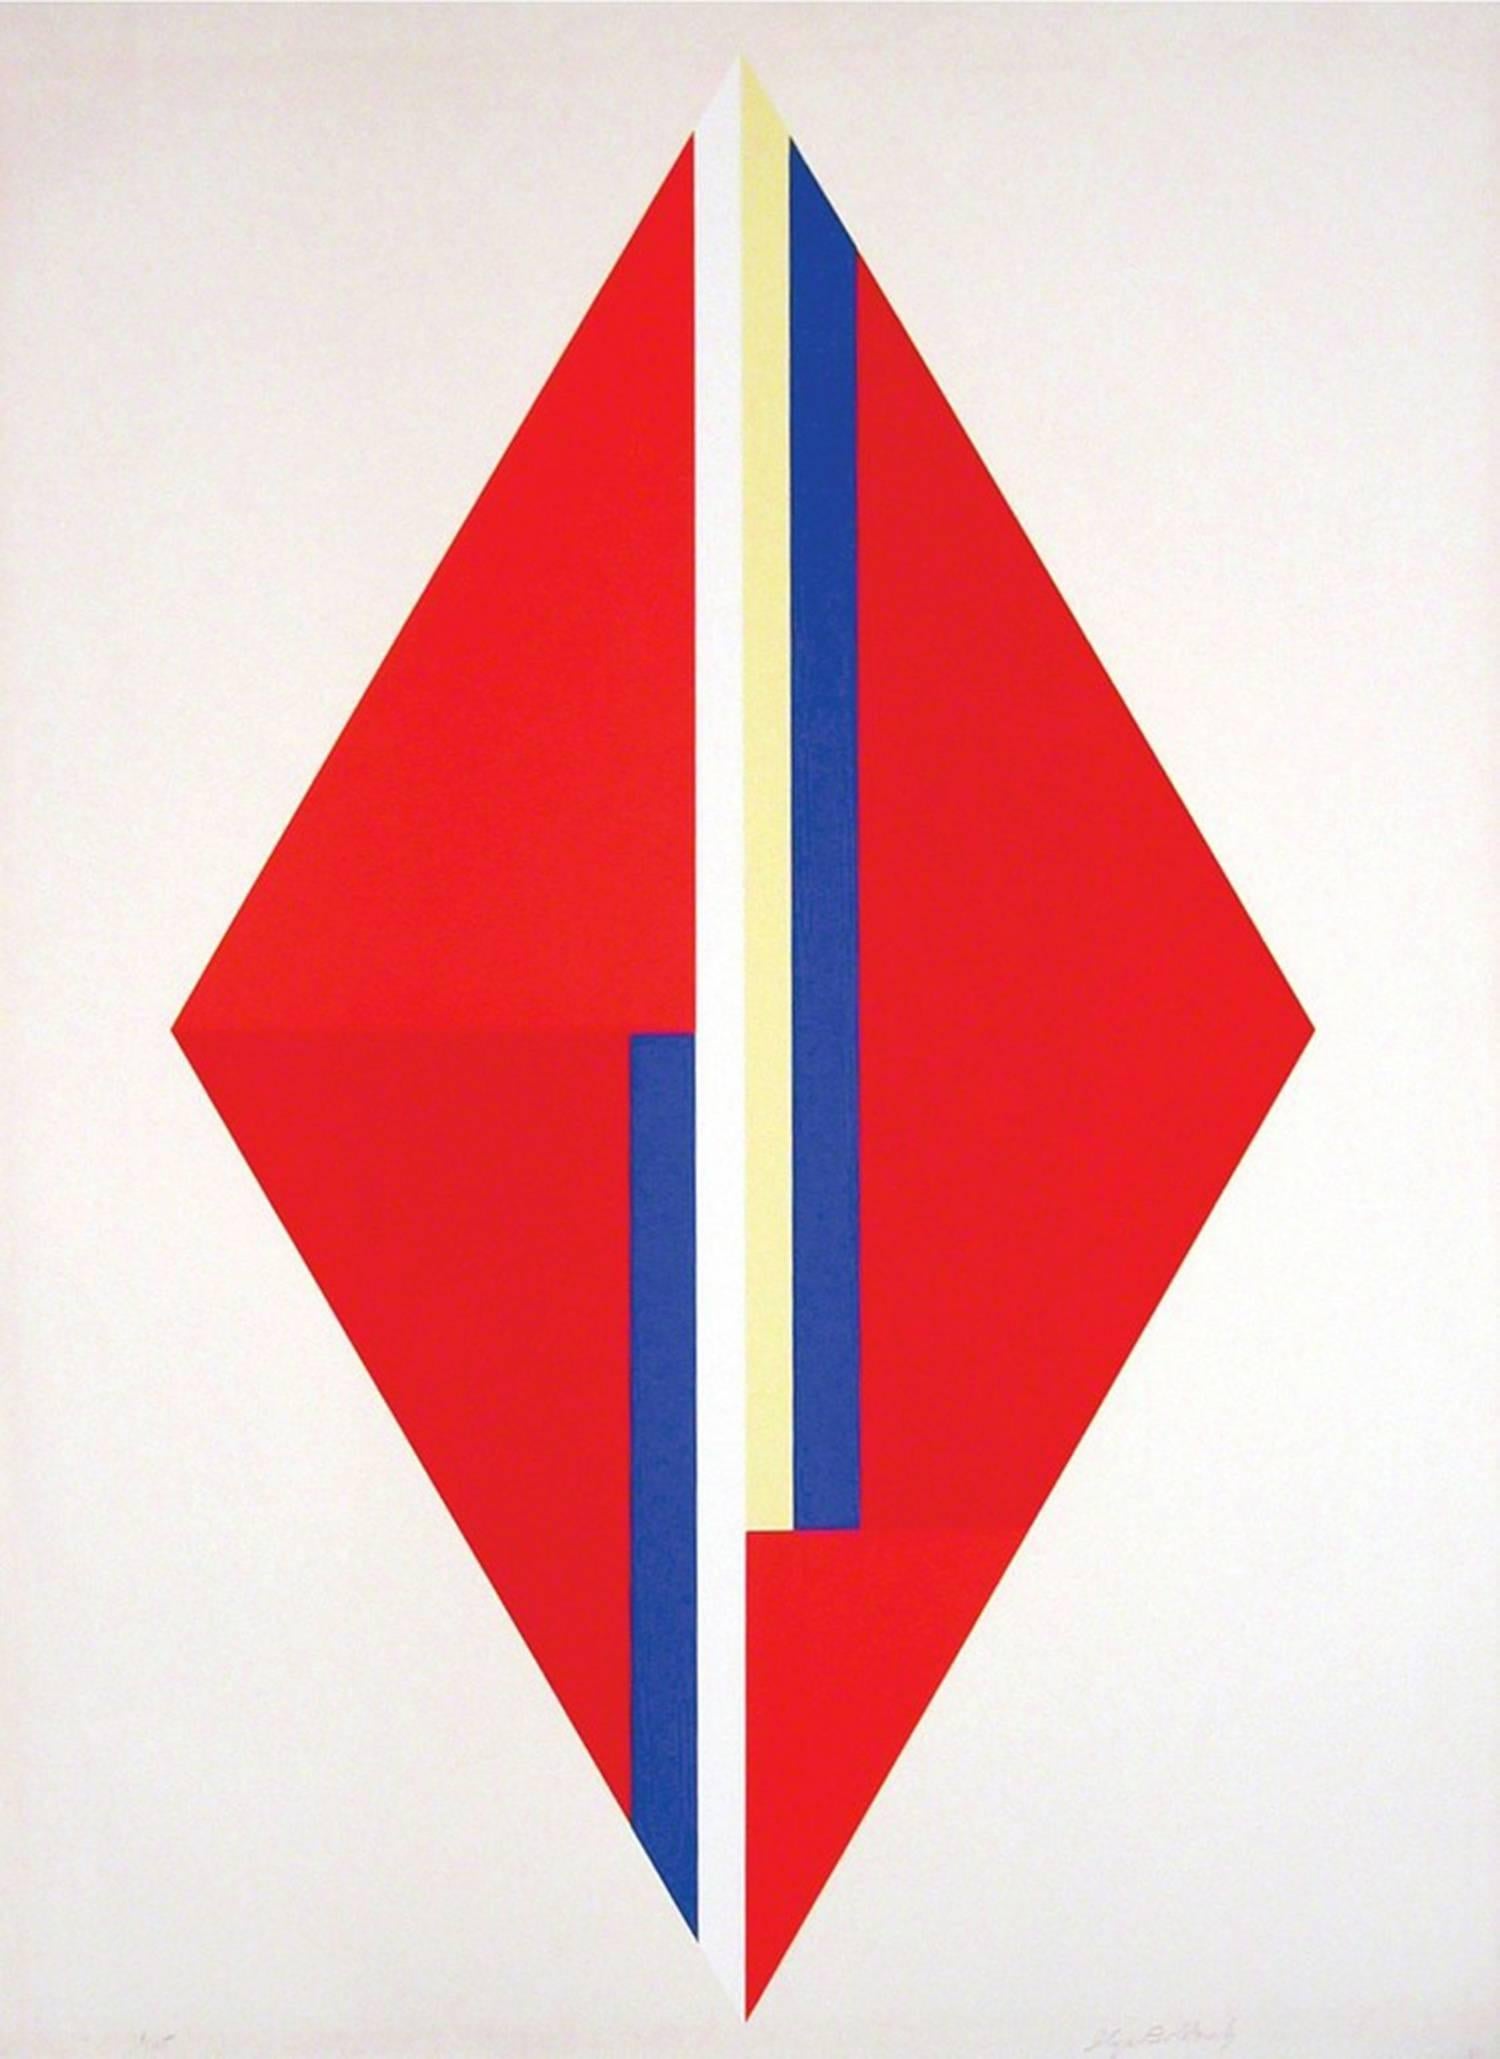 Ilya Bolotowsky Abstract Print - Geometric Composition with Red Diamond